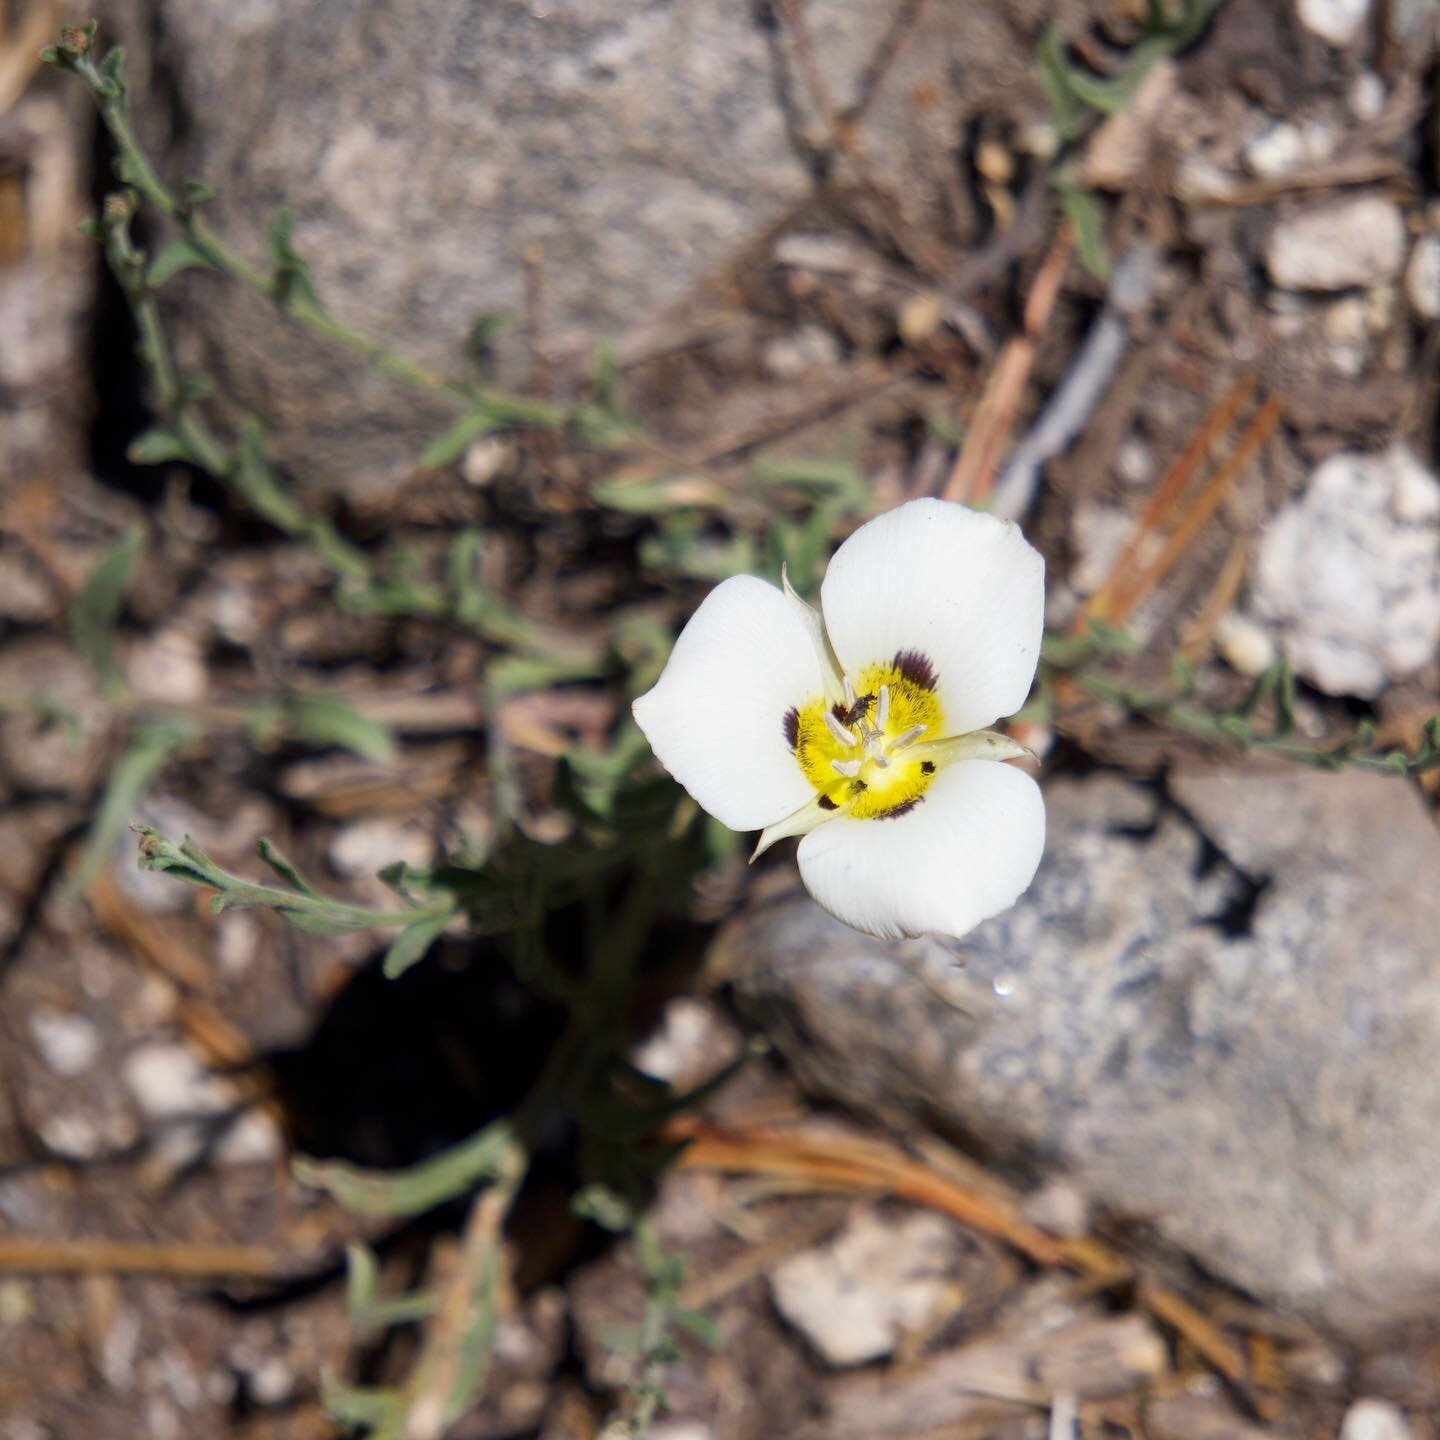 Leichtlin&rsquo;s Mariposa Lily (Calochortus leichtlinii)

Also called the Smokey Mariposa, this lily is native to the Sierras in California and western Nevada. It is common in open, gravelly places in chaparral or montane coniferous forest. The infl